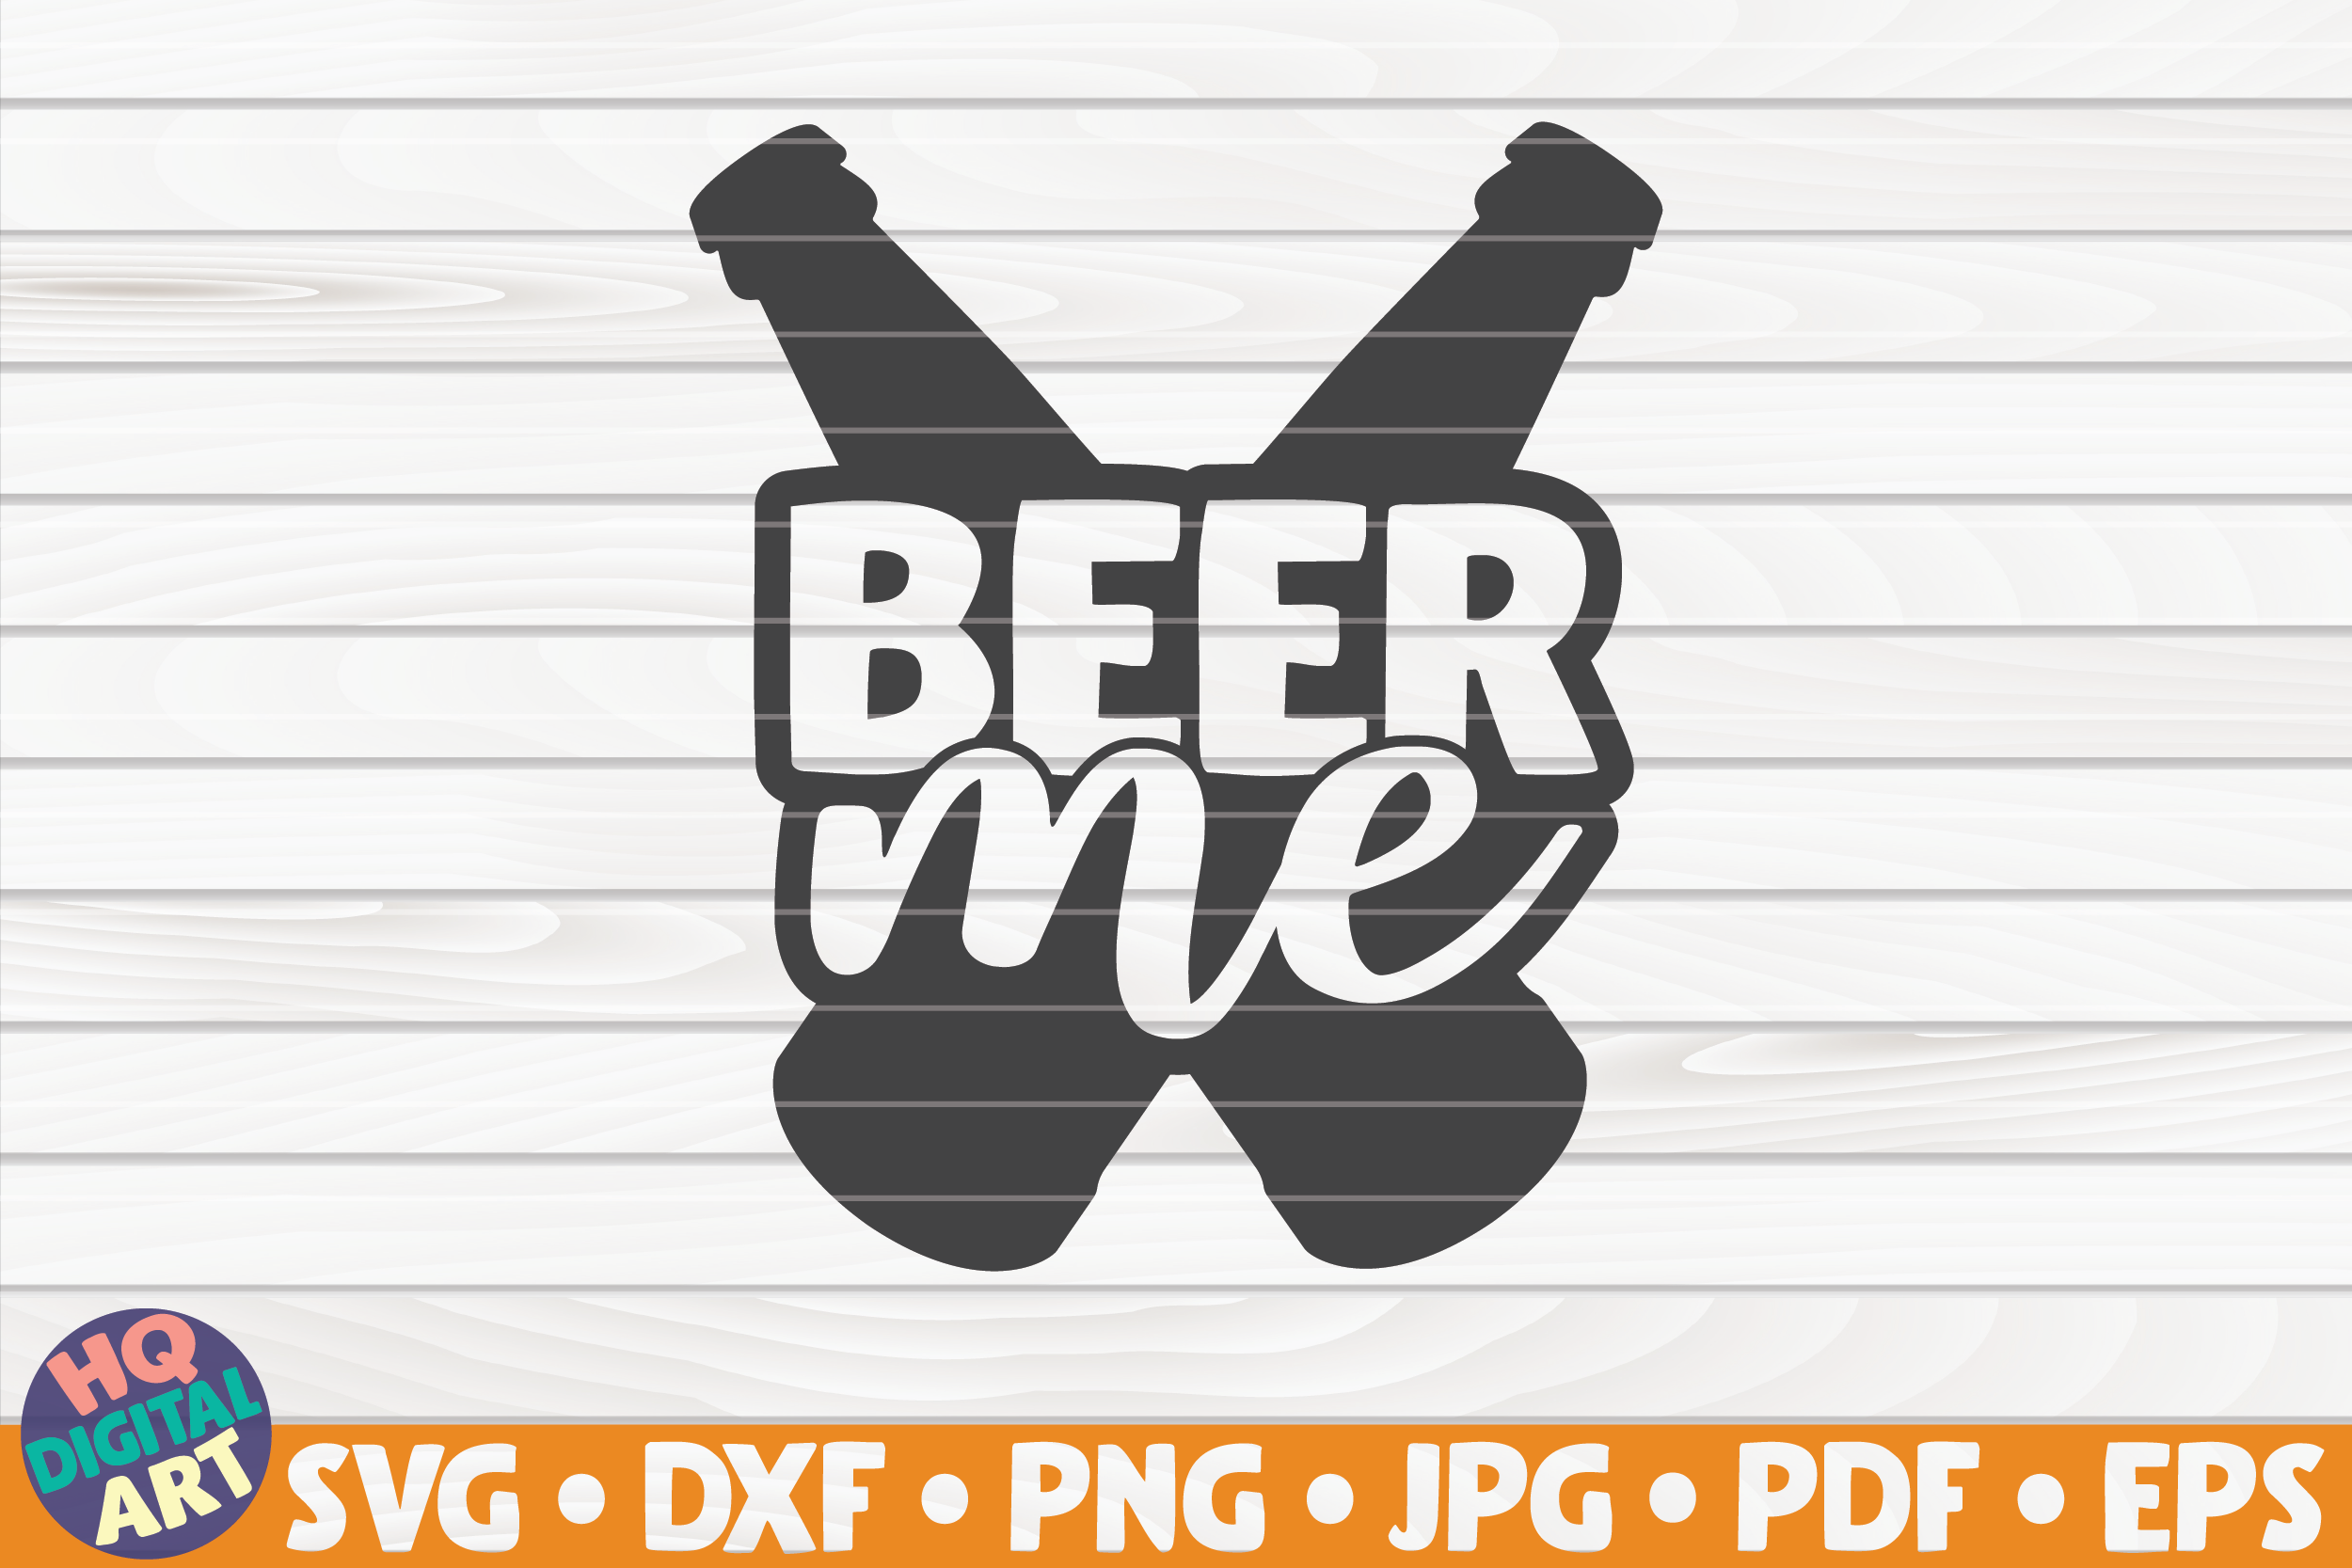 Download Beer me SVG | Beer Quote By HQDigitalArt | TheHungryJPEG.com